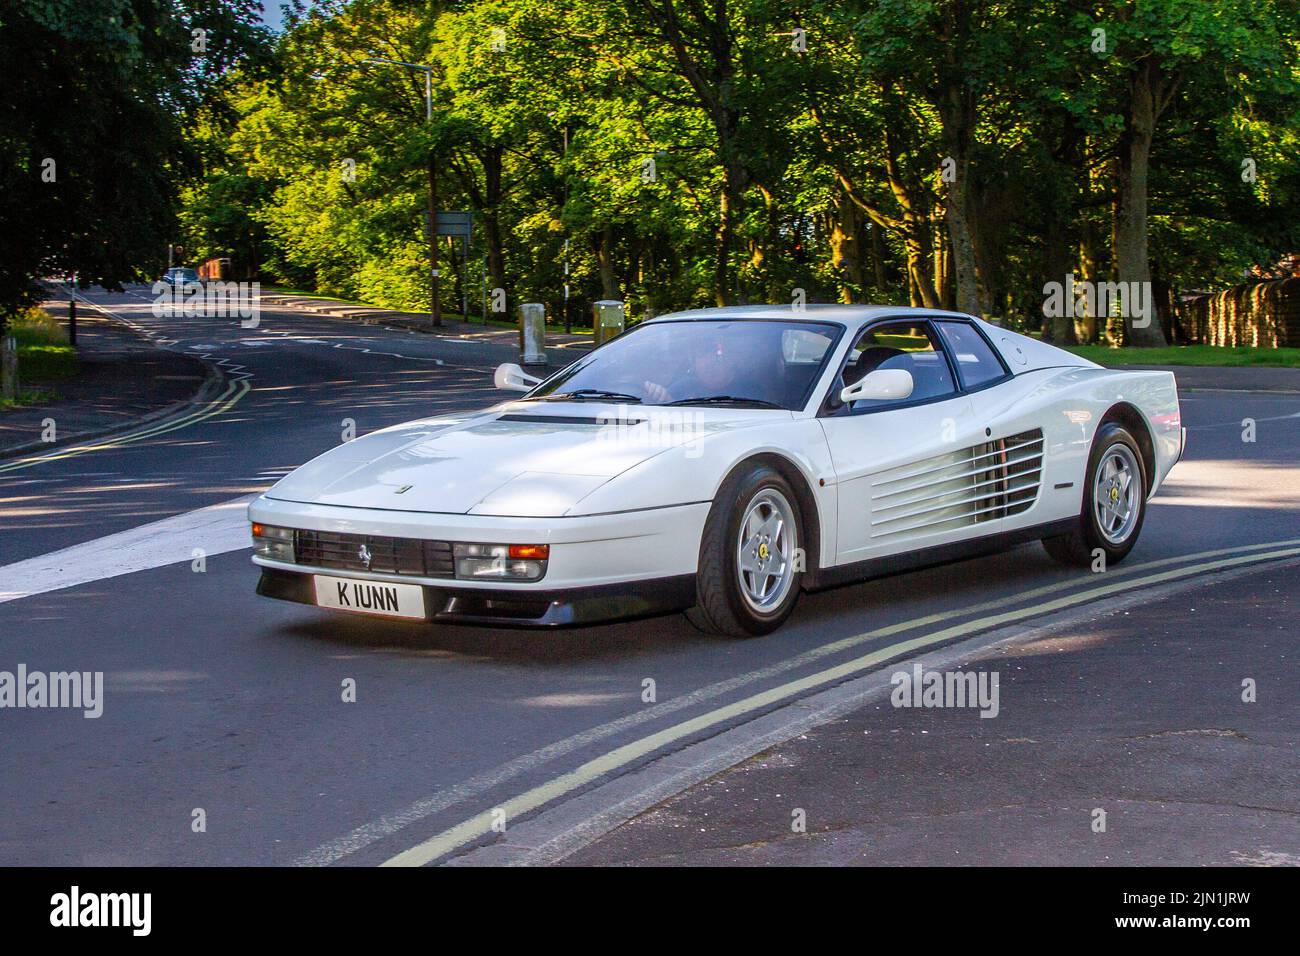 1993, 90s, nineties white FERRARI TESTAROSSA 4942 cc sports car; Collectable cars are travelling to display at the 13th Lytham Hall Summer Classic Car & Motorcycle Show, a Classic Vintage Collectible Transport Festival. Stock Photo